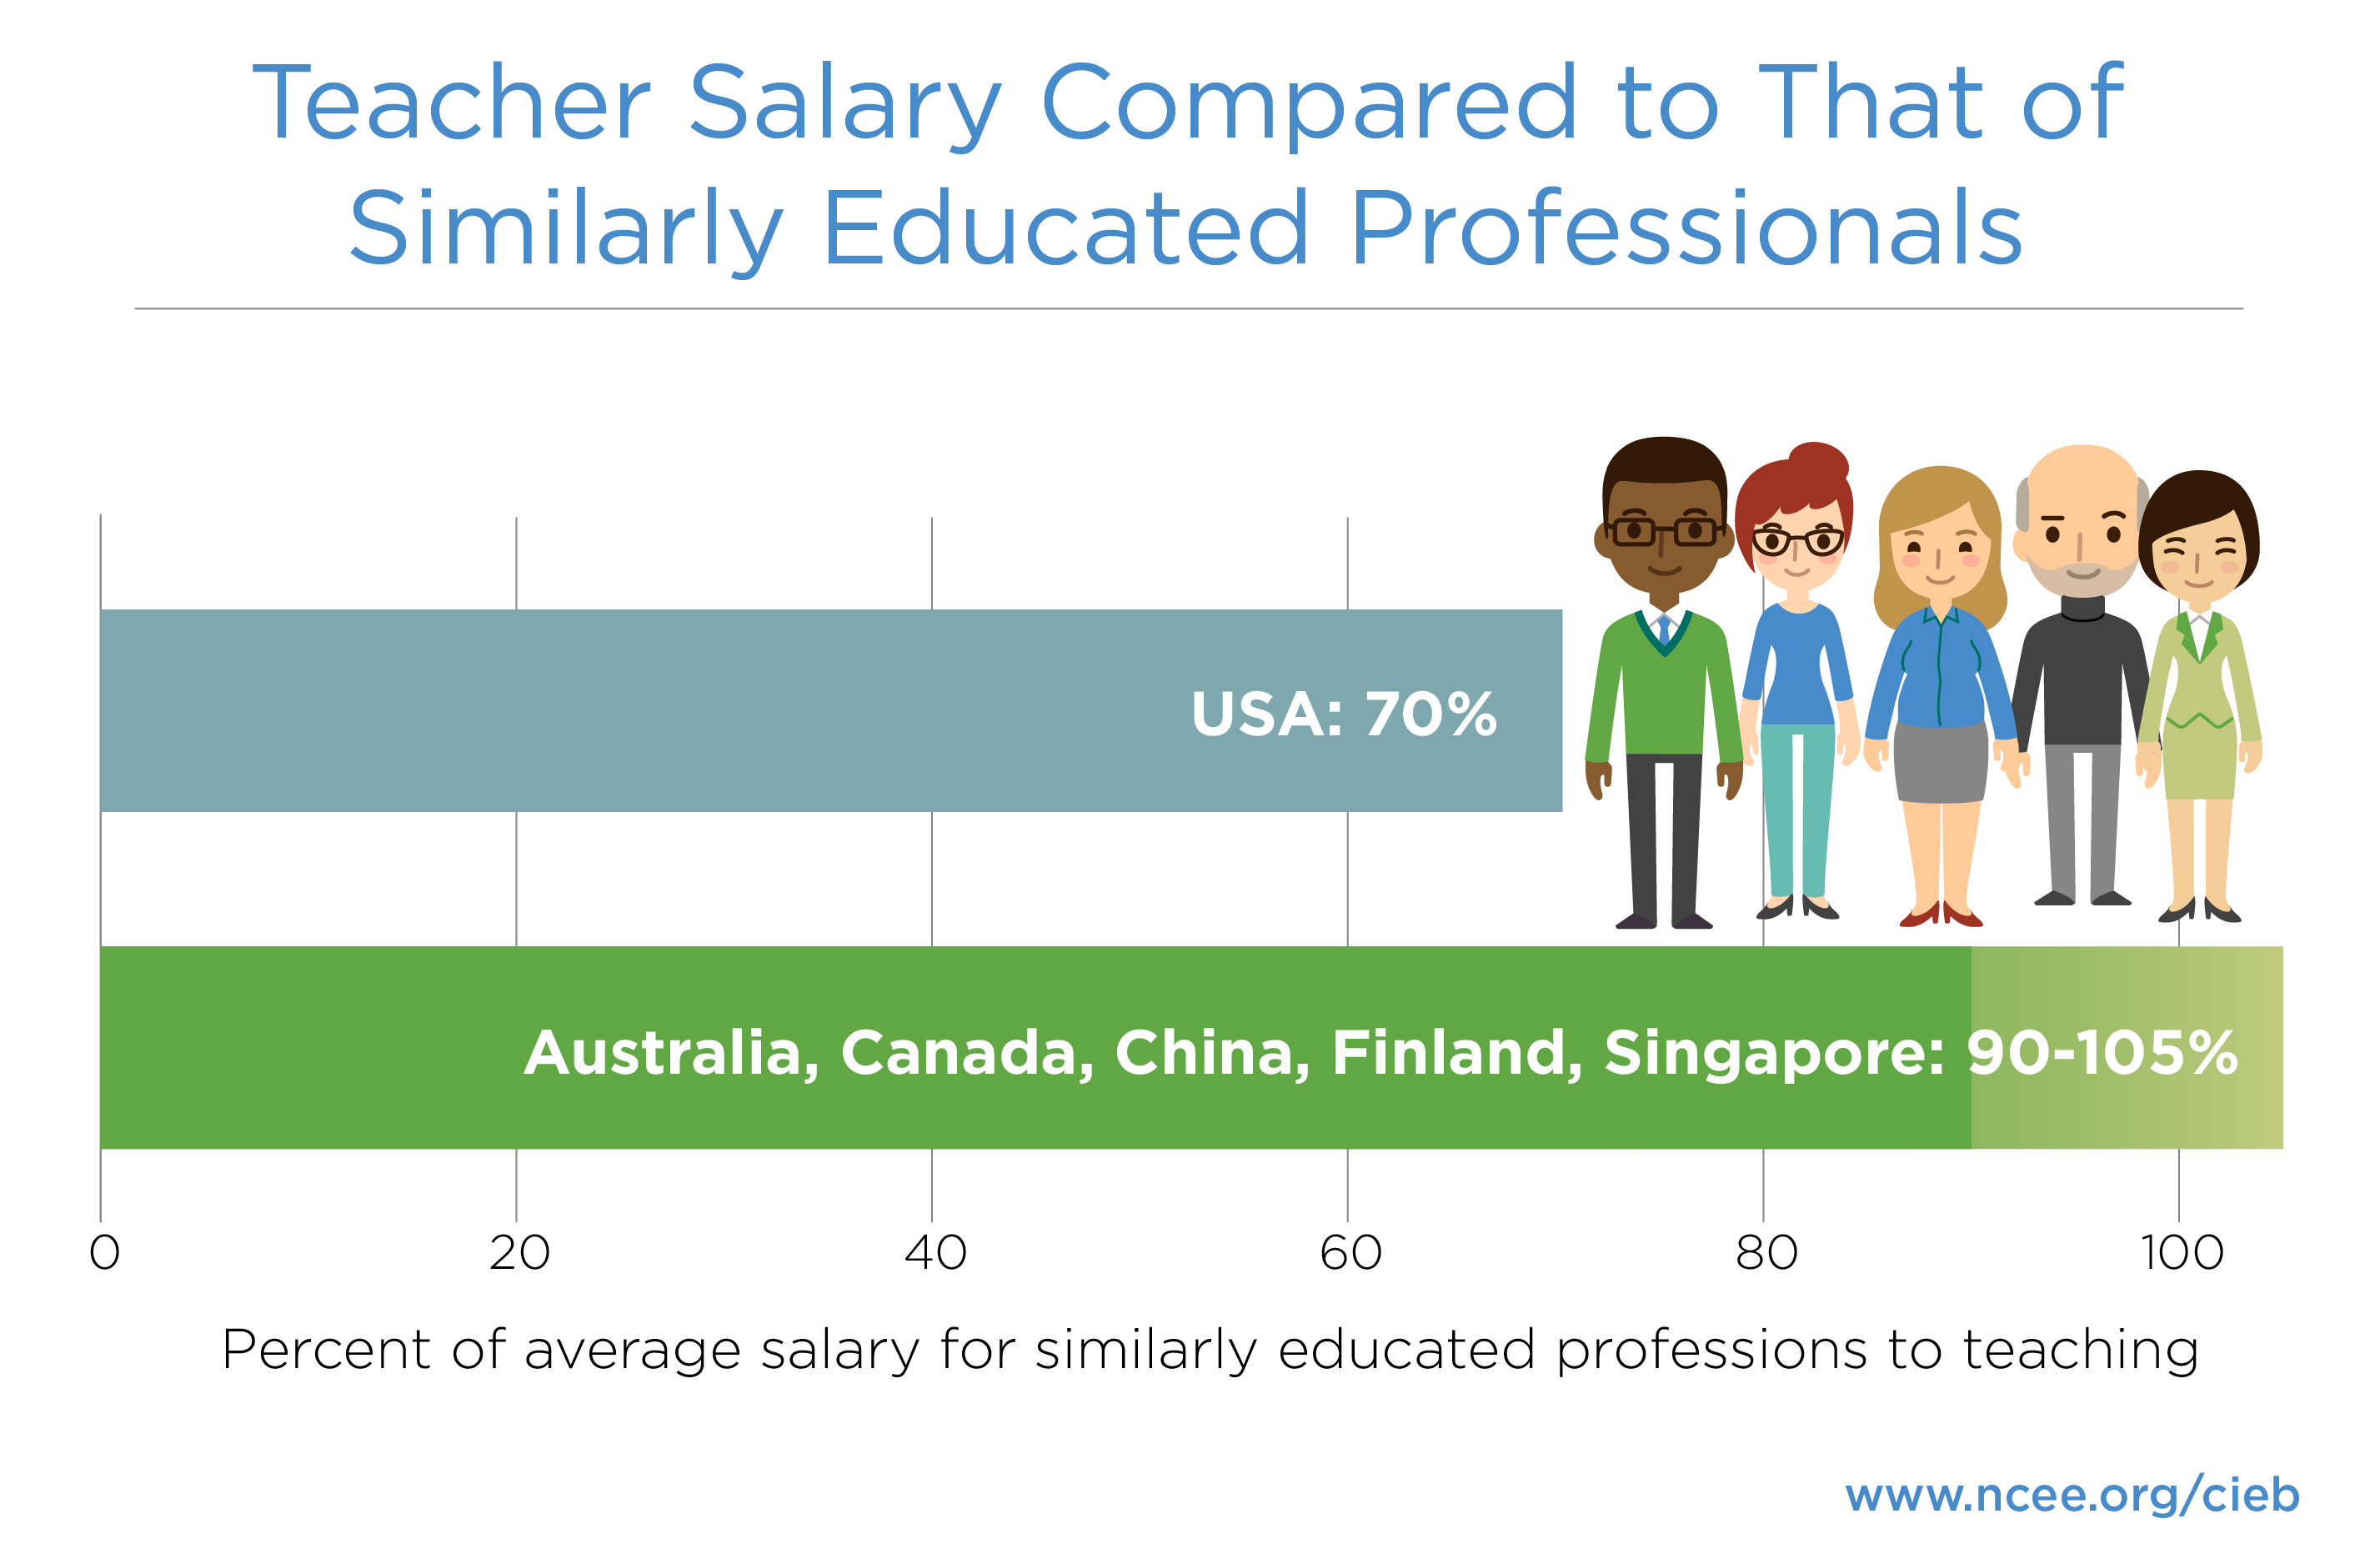 Unlike in the U.S., teachers in top-performing jurisdictions are paid as well as similarly educated professionals.